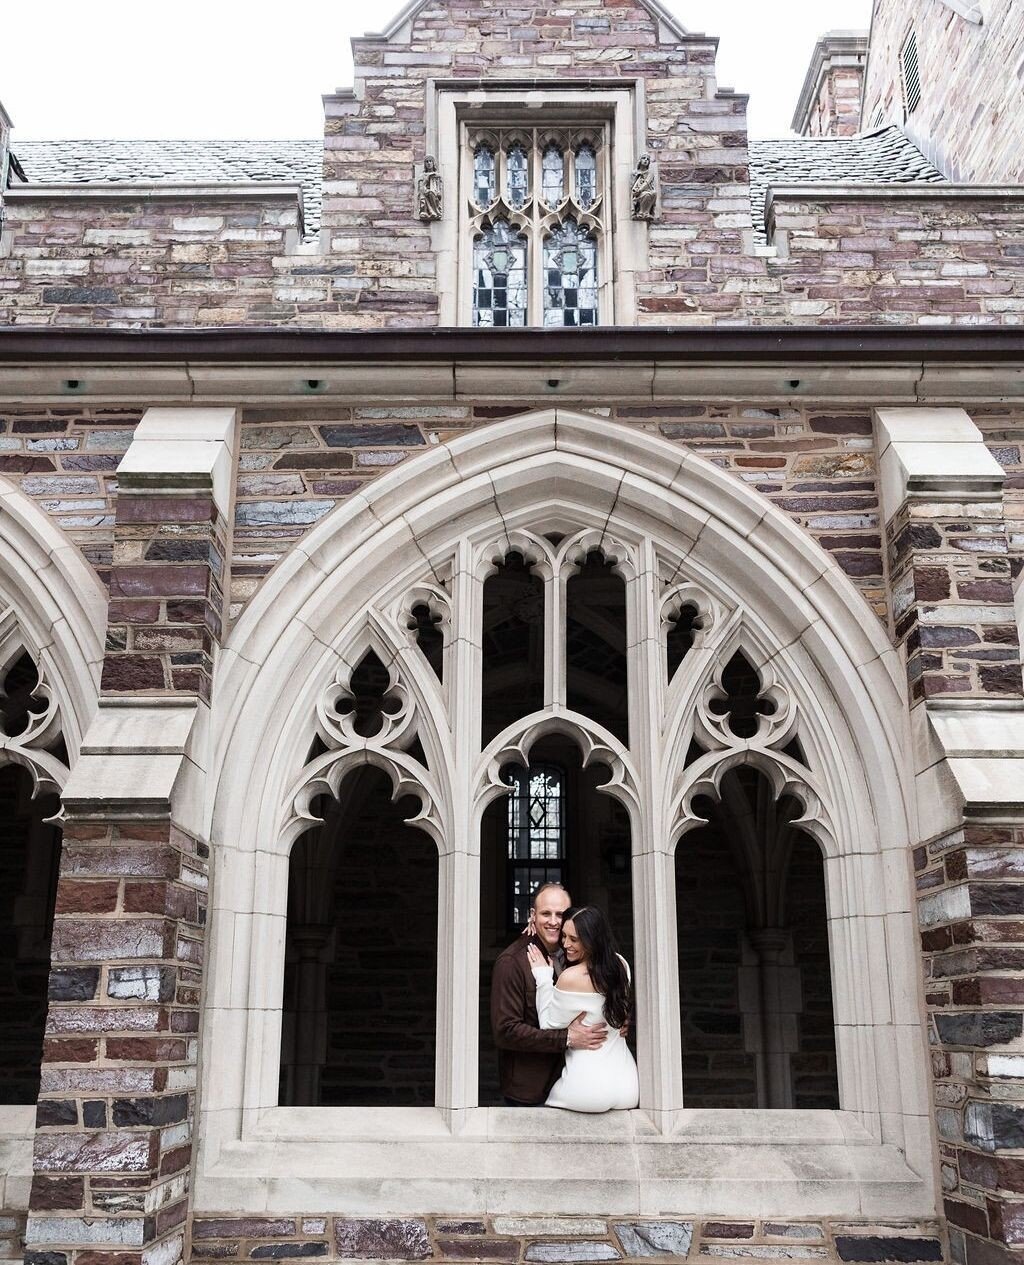 Forever amazed by the architectural beauty of Princeton University, it's the ideal setting for unforgettable engagement sessions. With its timeless charm and historic grandeur, every corner offers a picturesque backdrop for capturing your love story.